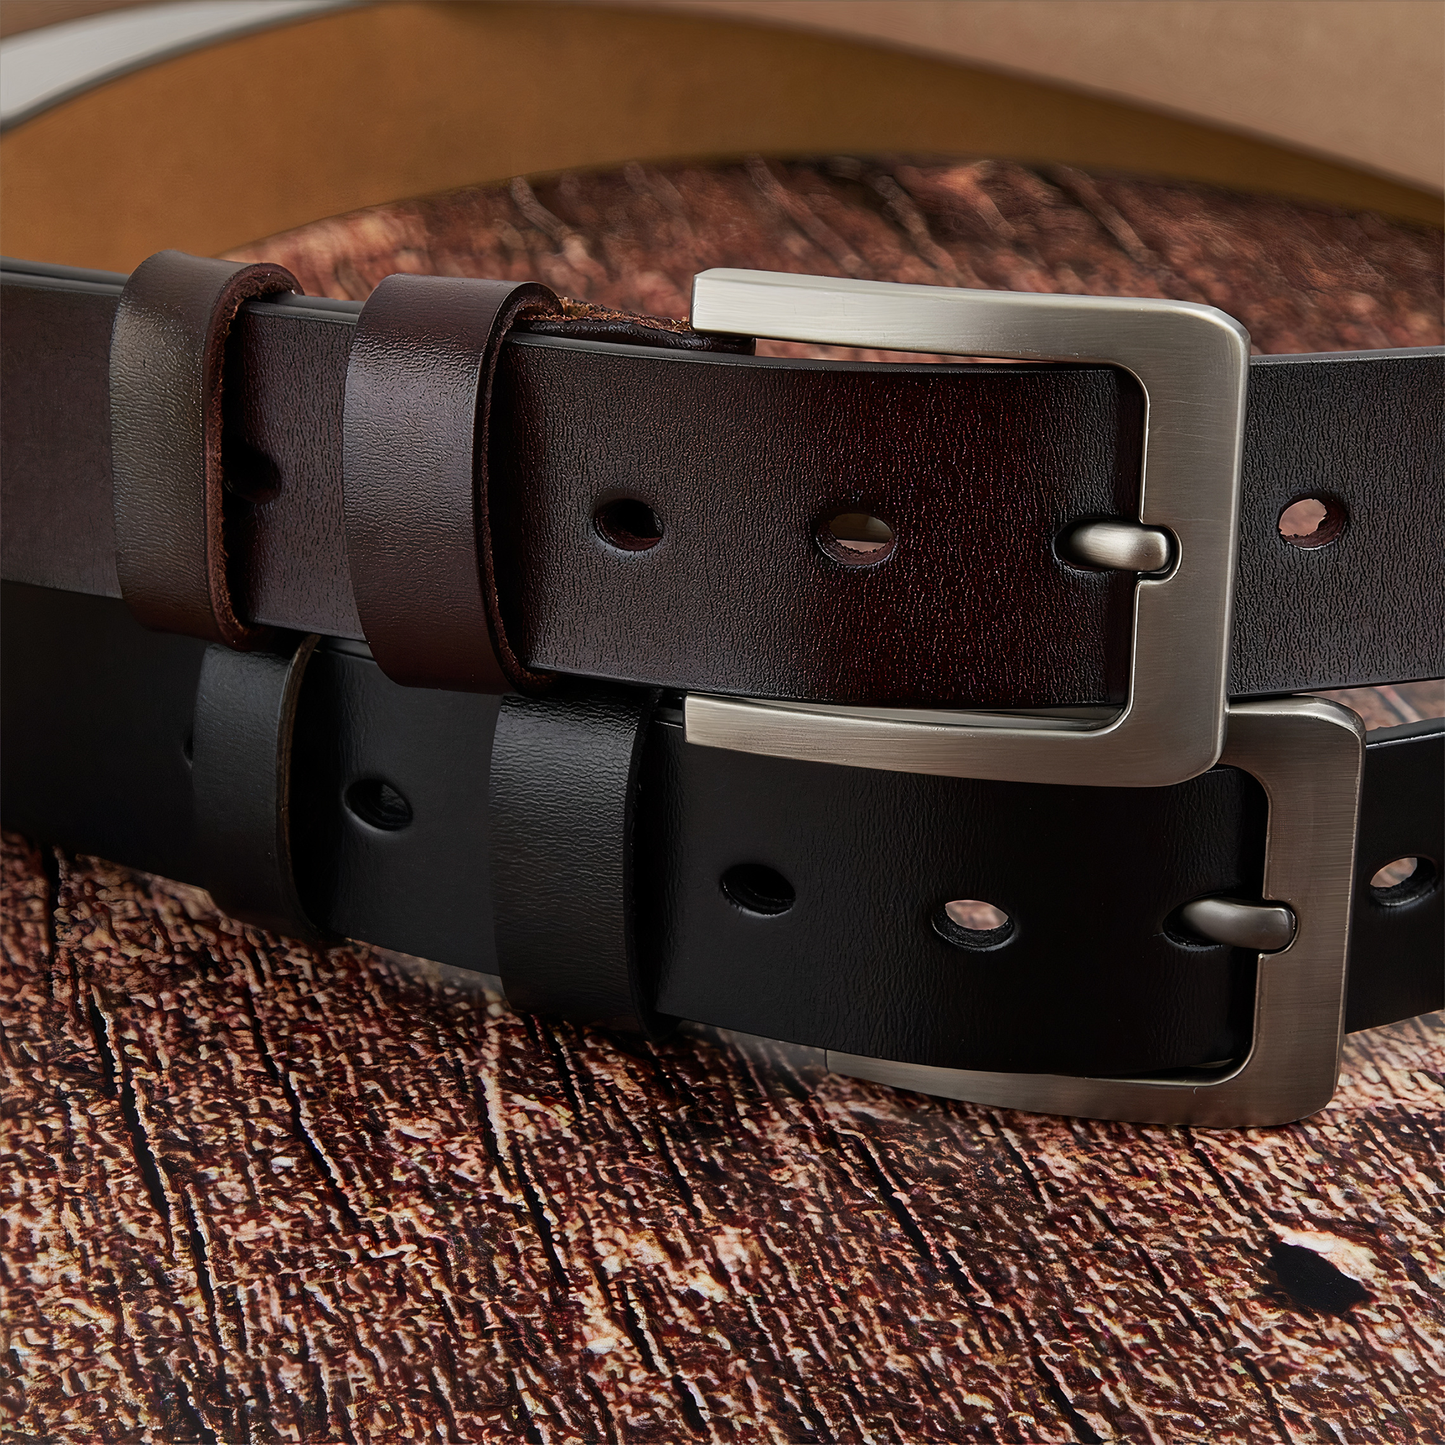 I Licked It, So It's Mine - Personalized Engraved Leather Belt